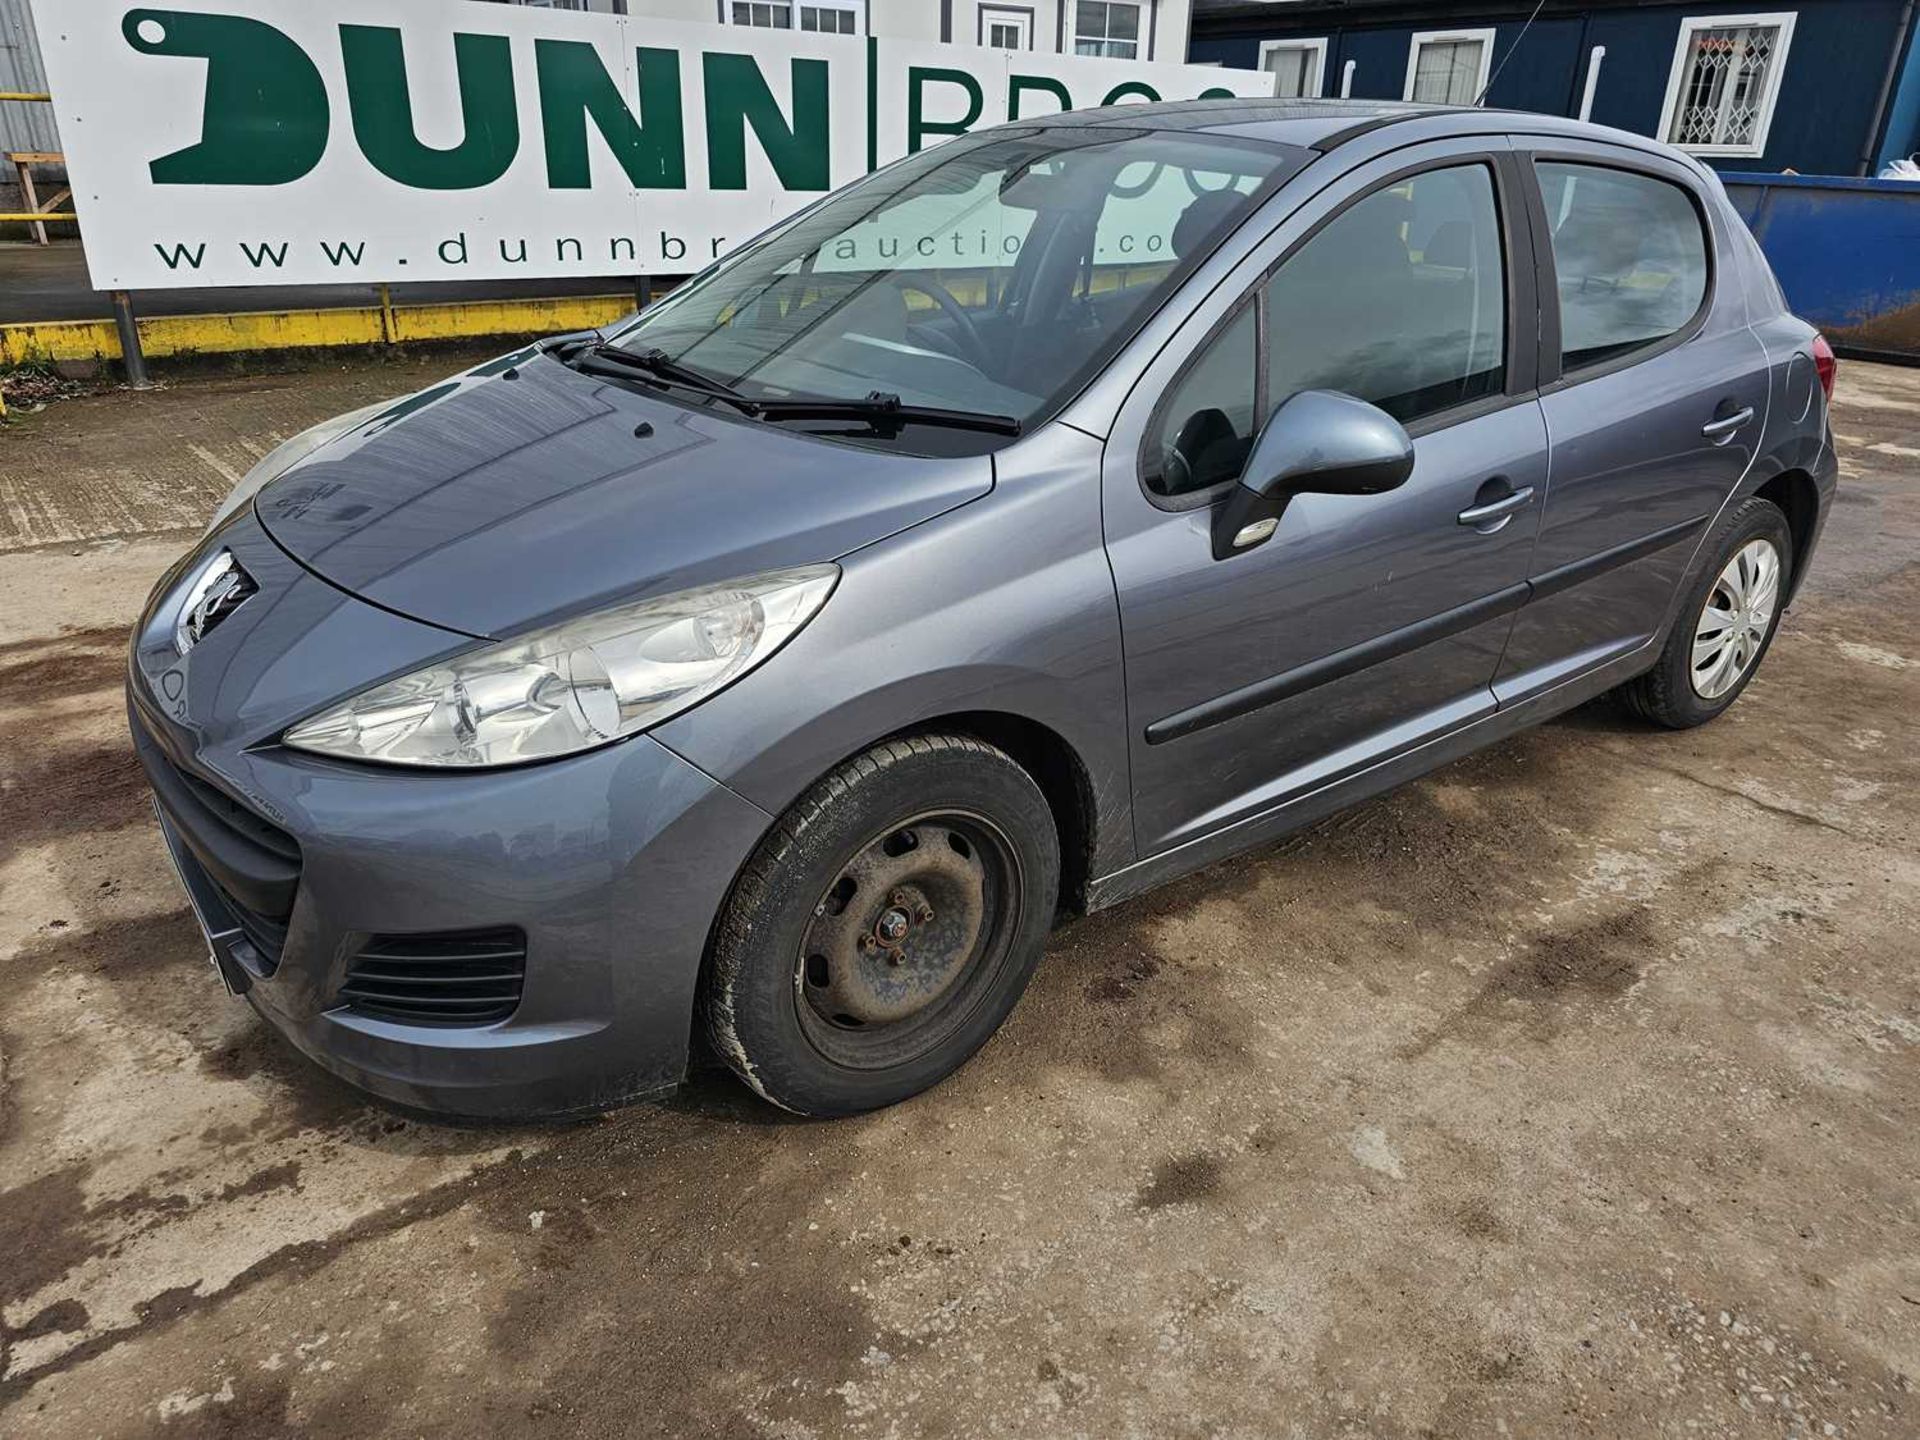 2010 Peugeot 207 S HDi, 5 Speed (Reg. Docs. Available)